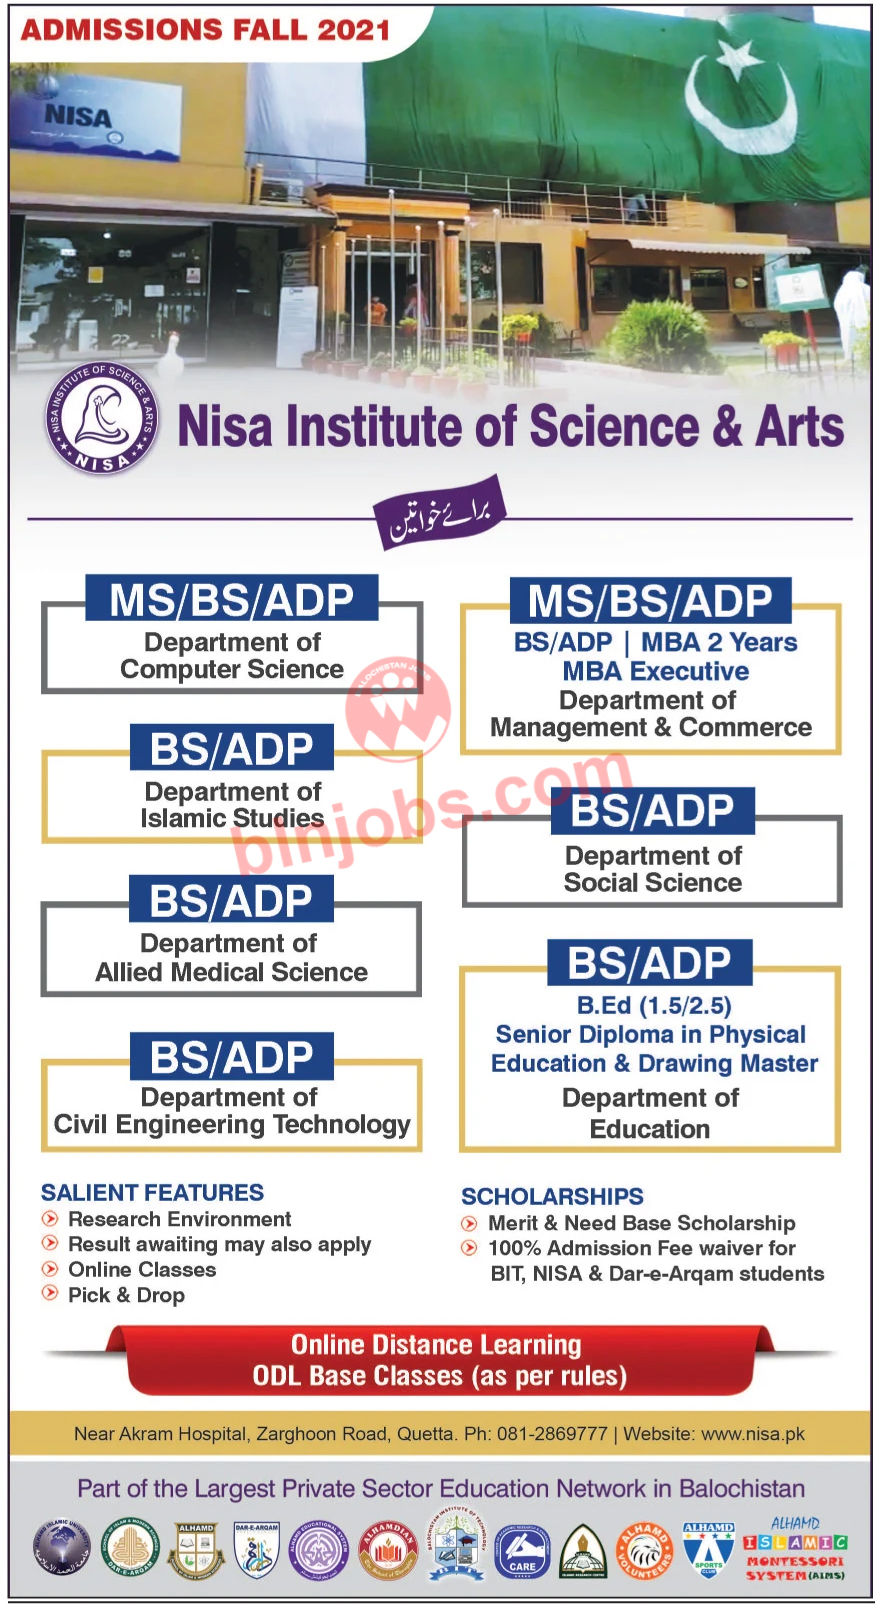 Nisa Institute of Science and Arts Admissions 2021